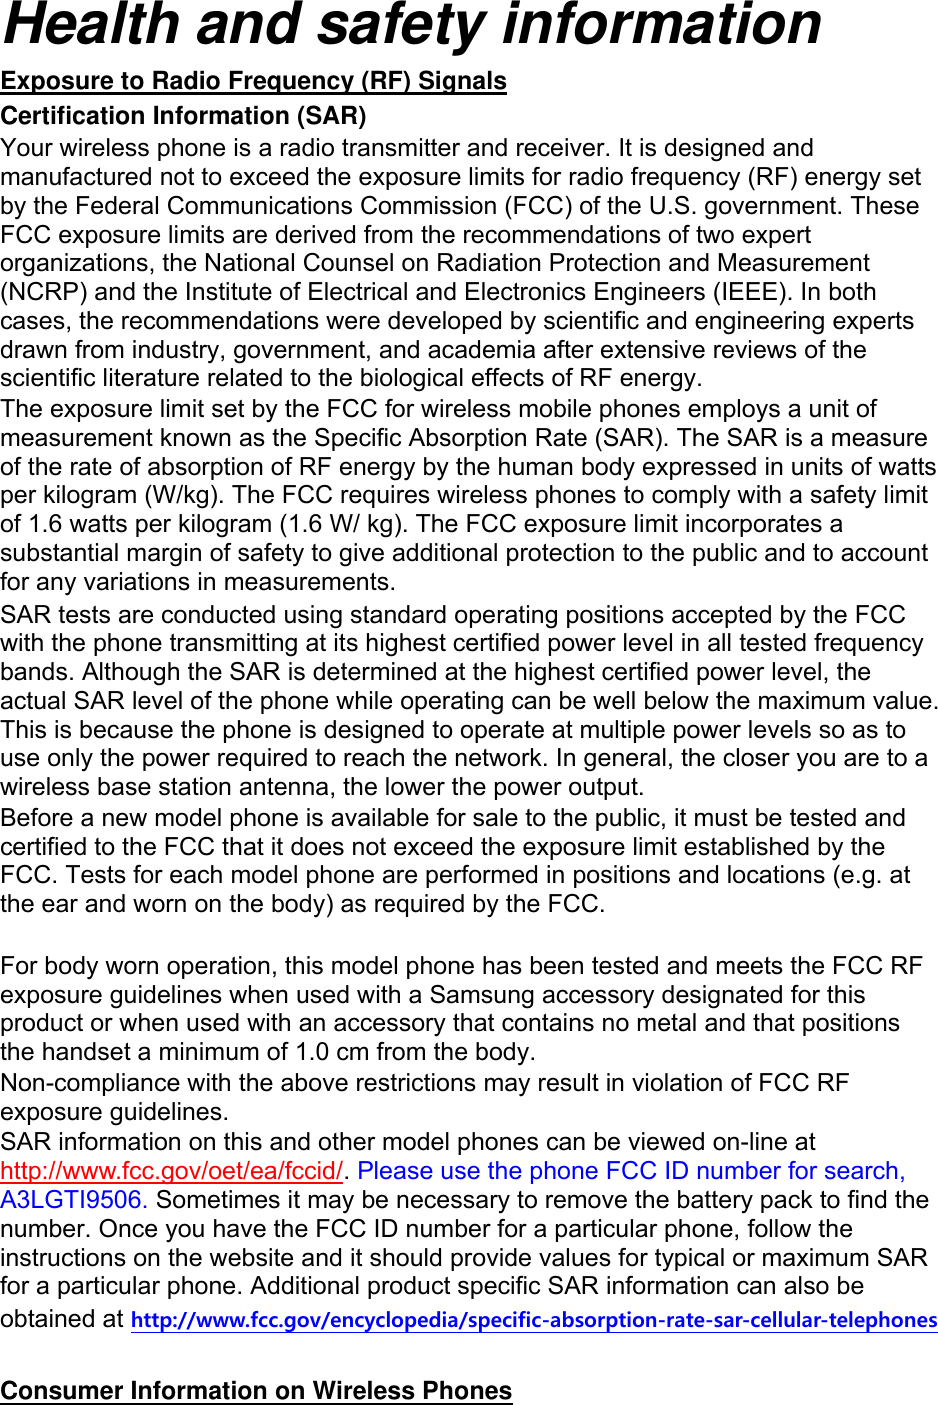 Health and safety information Exposure to Radio Frequency (RF) Signals Certification Information (SAR) Your wireless phone is a radio transmitter and receiver. It is designed and manufactured not to exceed the exposure limits for radio frequency (RF) energy set by the Federal Communications Commission (FCC) of the U.S. government. These FCC exposure limits are derived from the recommendations of two expert organizations, the National Counsel on Radiation Protection and Measurement (NCRP) and the Institute of Electrical and Electronics Engineers (IEEE). In both cases, the recommendations were developed by scientific and engineering experts drawn from industry, government, and academia after extensive reviews of the scientific literature related to the biological effects of RF energy. The exposure limit set by the FCC for wireless mobile phones employs a unit of measurement known as the Specific Absorption Rate (SAR). The SAR is a measure of the rate of absorption of RF energy by the human body expressed in units of watts per kilogram (W/kg). The FCC requires wireless phones to comply with a safety limit of 1.6 watts per kilogram (1.6 W/ kg). The FCC exposure limit incorporates a substantial margin of safety to give additional protection to the public and to account for any variations in measurements. SAR tests are conducted using standard operating positions accepted by the FCC with the phone transmitting at its highest certified power level in all tested frequency bands. Although the SAR is determined at the highest certified power level, the actual SAR level of the phone while operating can be well below the maximum value. This is because the phone is designed to operate at multiple power levels so as to use only the power required to reach the network. In general, the closer you are to a wireless base station antenna, the lower the power output. Before a new model phone is available for sale to the public, it must be tested and certified to the FCC that it does not exceed the exposure limit established by the FCC. Tests for each model phone are performed in positions and locations (e.g. at the ear and worn on the body) as required by the FCC.      For body worn operation, this model phone has been tested and meets the FCC RF exposure guidelines when used with a Samsung accessory designated for this product or when used with an accessory that contains no metal and that positions the handset a minimum of 1.0 cm from the body.   Non-compliance with the above restrictions may result in violation of FCC RF exposure guidelines. SAR information on this and other model phones can be viewed on-line at http://www.fcc.gov/oet/ea/fccid/. Please use the phone FCC ID number for search, A3LGTI9506. Sometimes it may be necessary to remove the battery pack to find the number. Once you have the FCC ID number for a particular phone, follow the instructions on the website and it should provide values for typical or maximum SAR for a particular phone. Additional product specific SAR information can also be obtained at http://www.fcc.gov/encyclopedia/specific-absorption-rate-sar-cellular-telephones  Consumer Information on Wireless Phones 